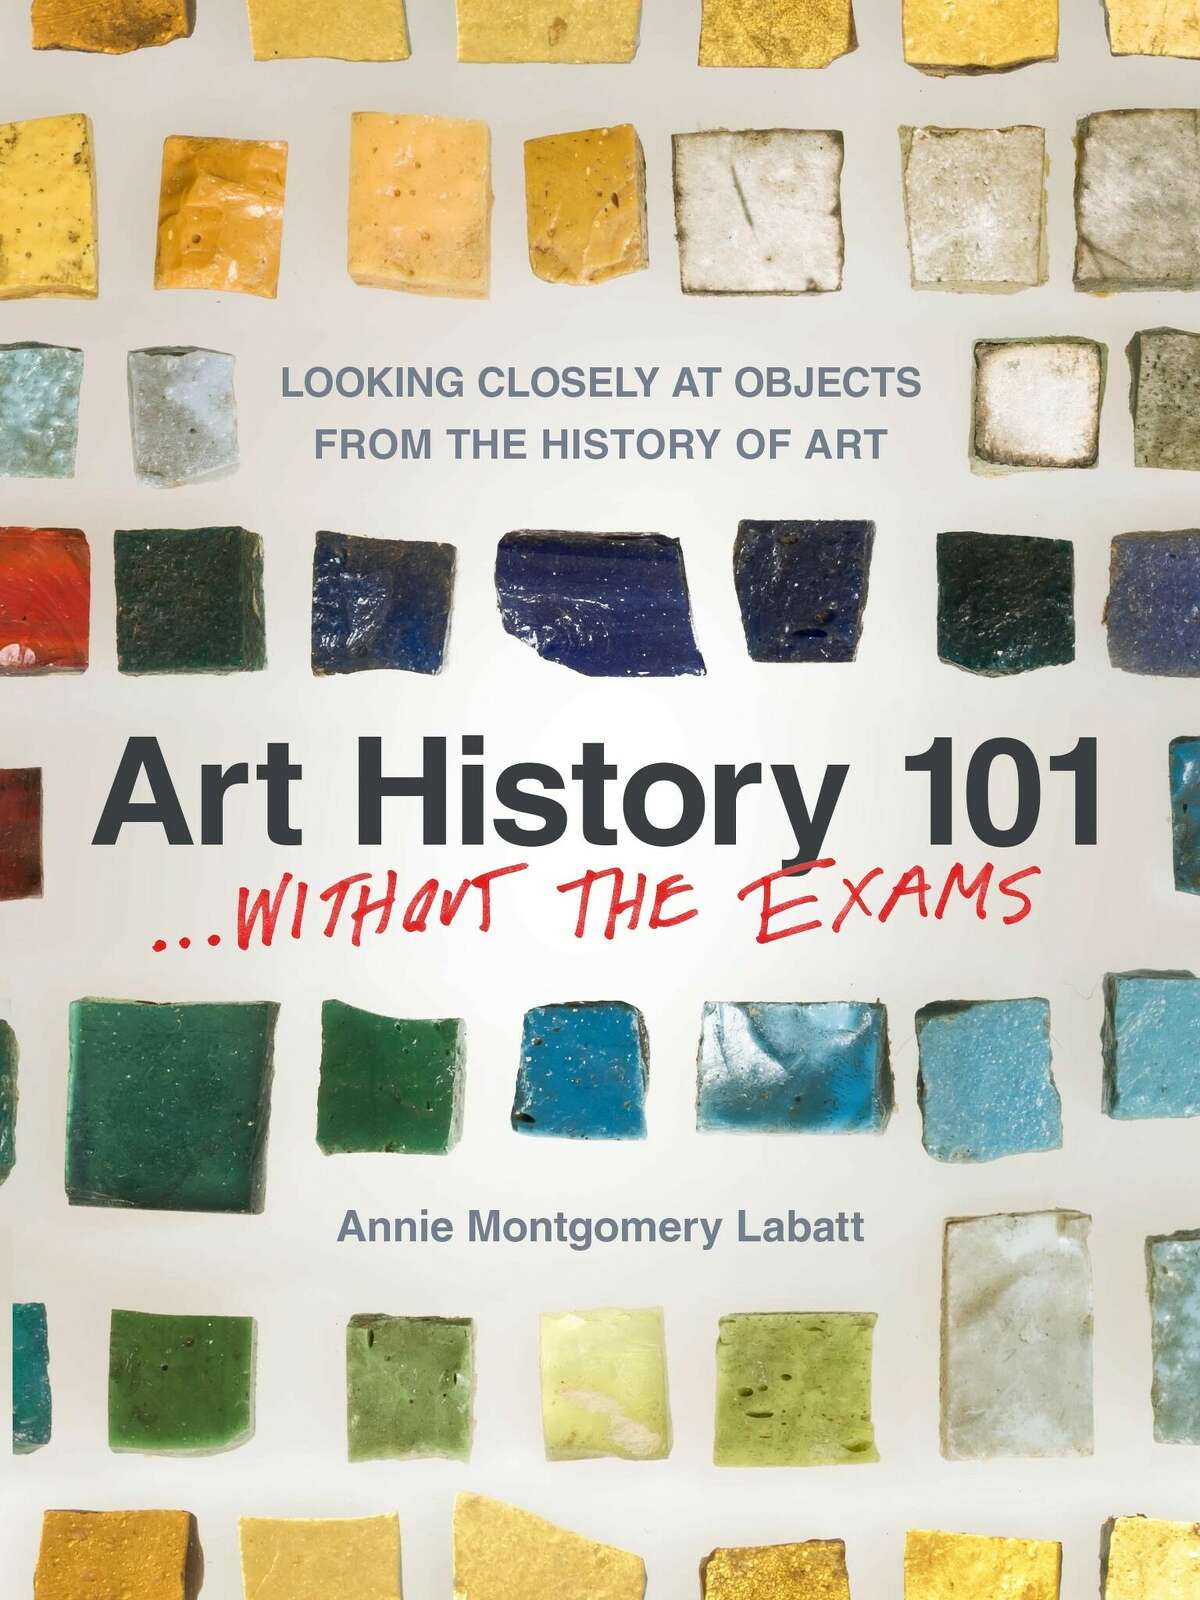 'Art History 101 ... Without the Exams' was written by former University of Texas at San Antonio professor Annie Labatt.